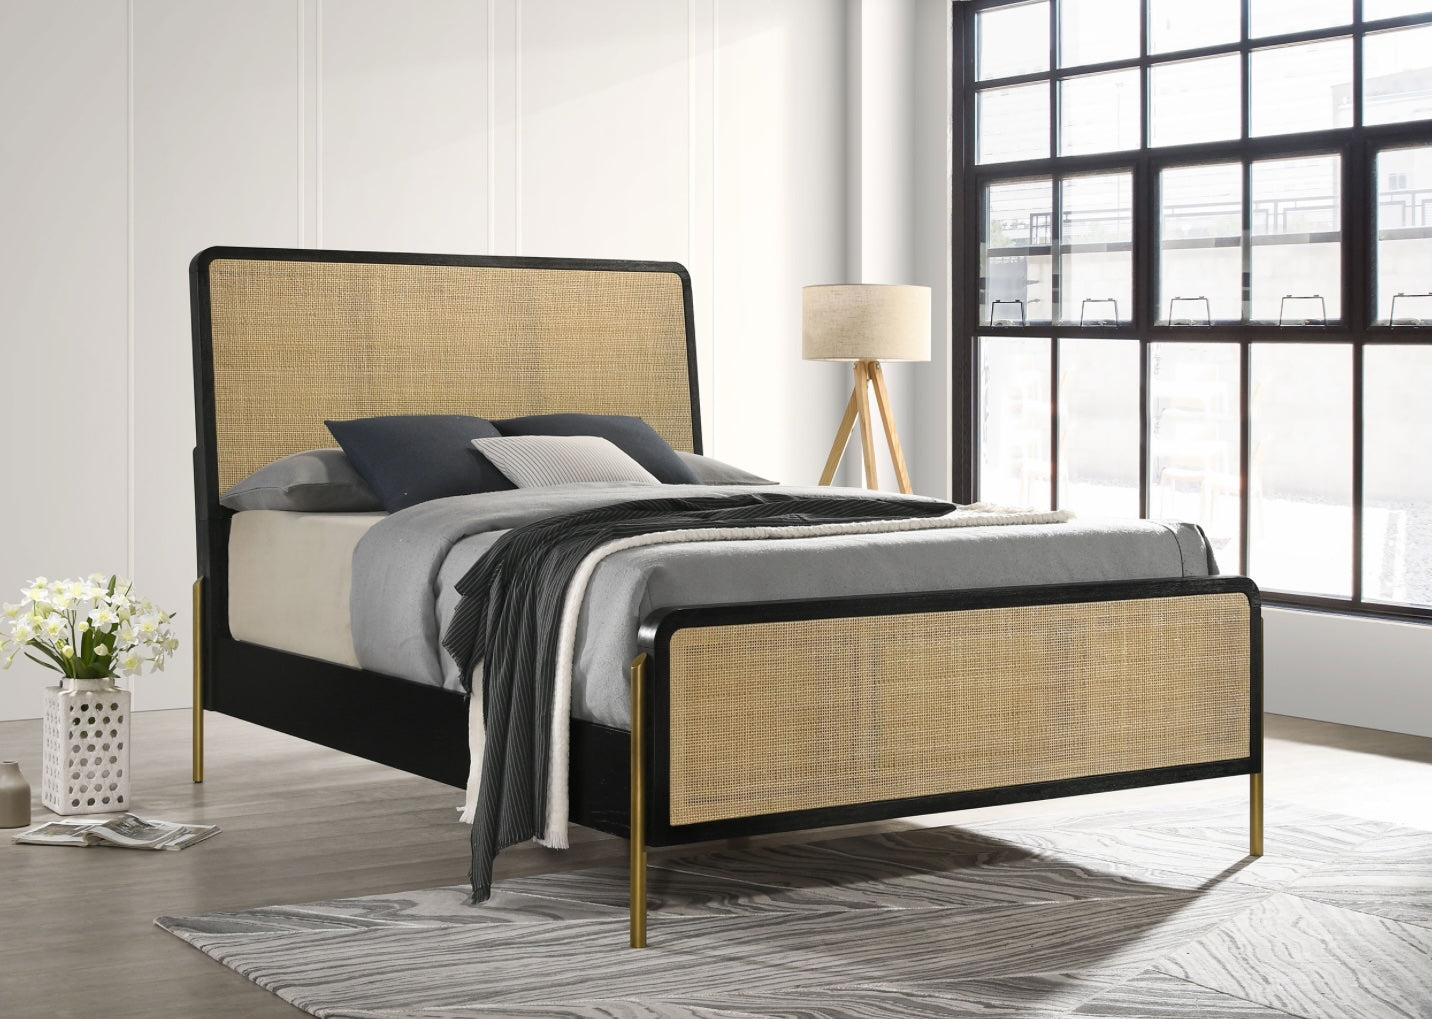 Arini Eastern King Bedroom Set With Woven Rattan Headboard Black And Natural